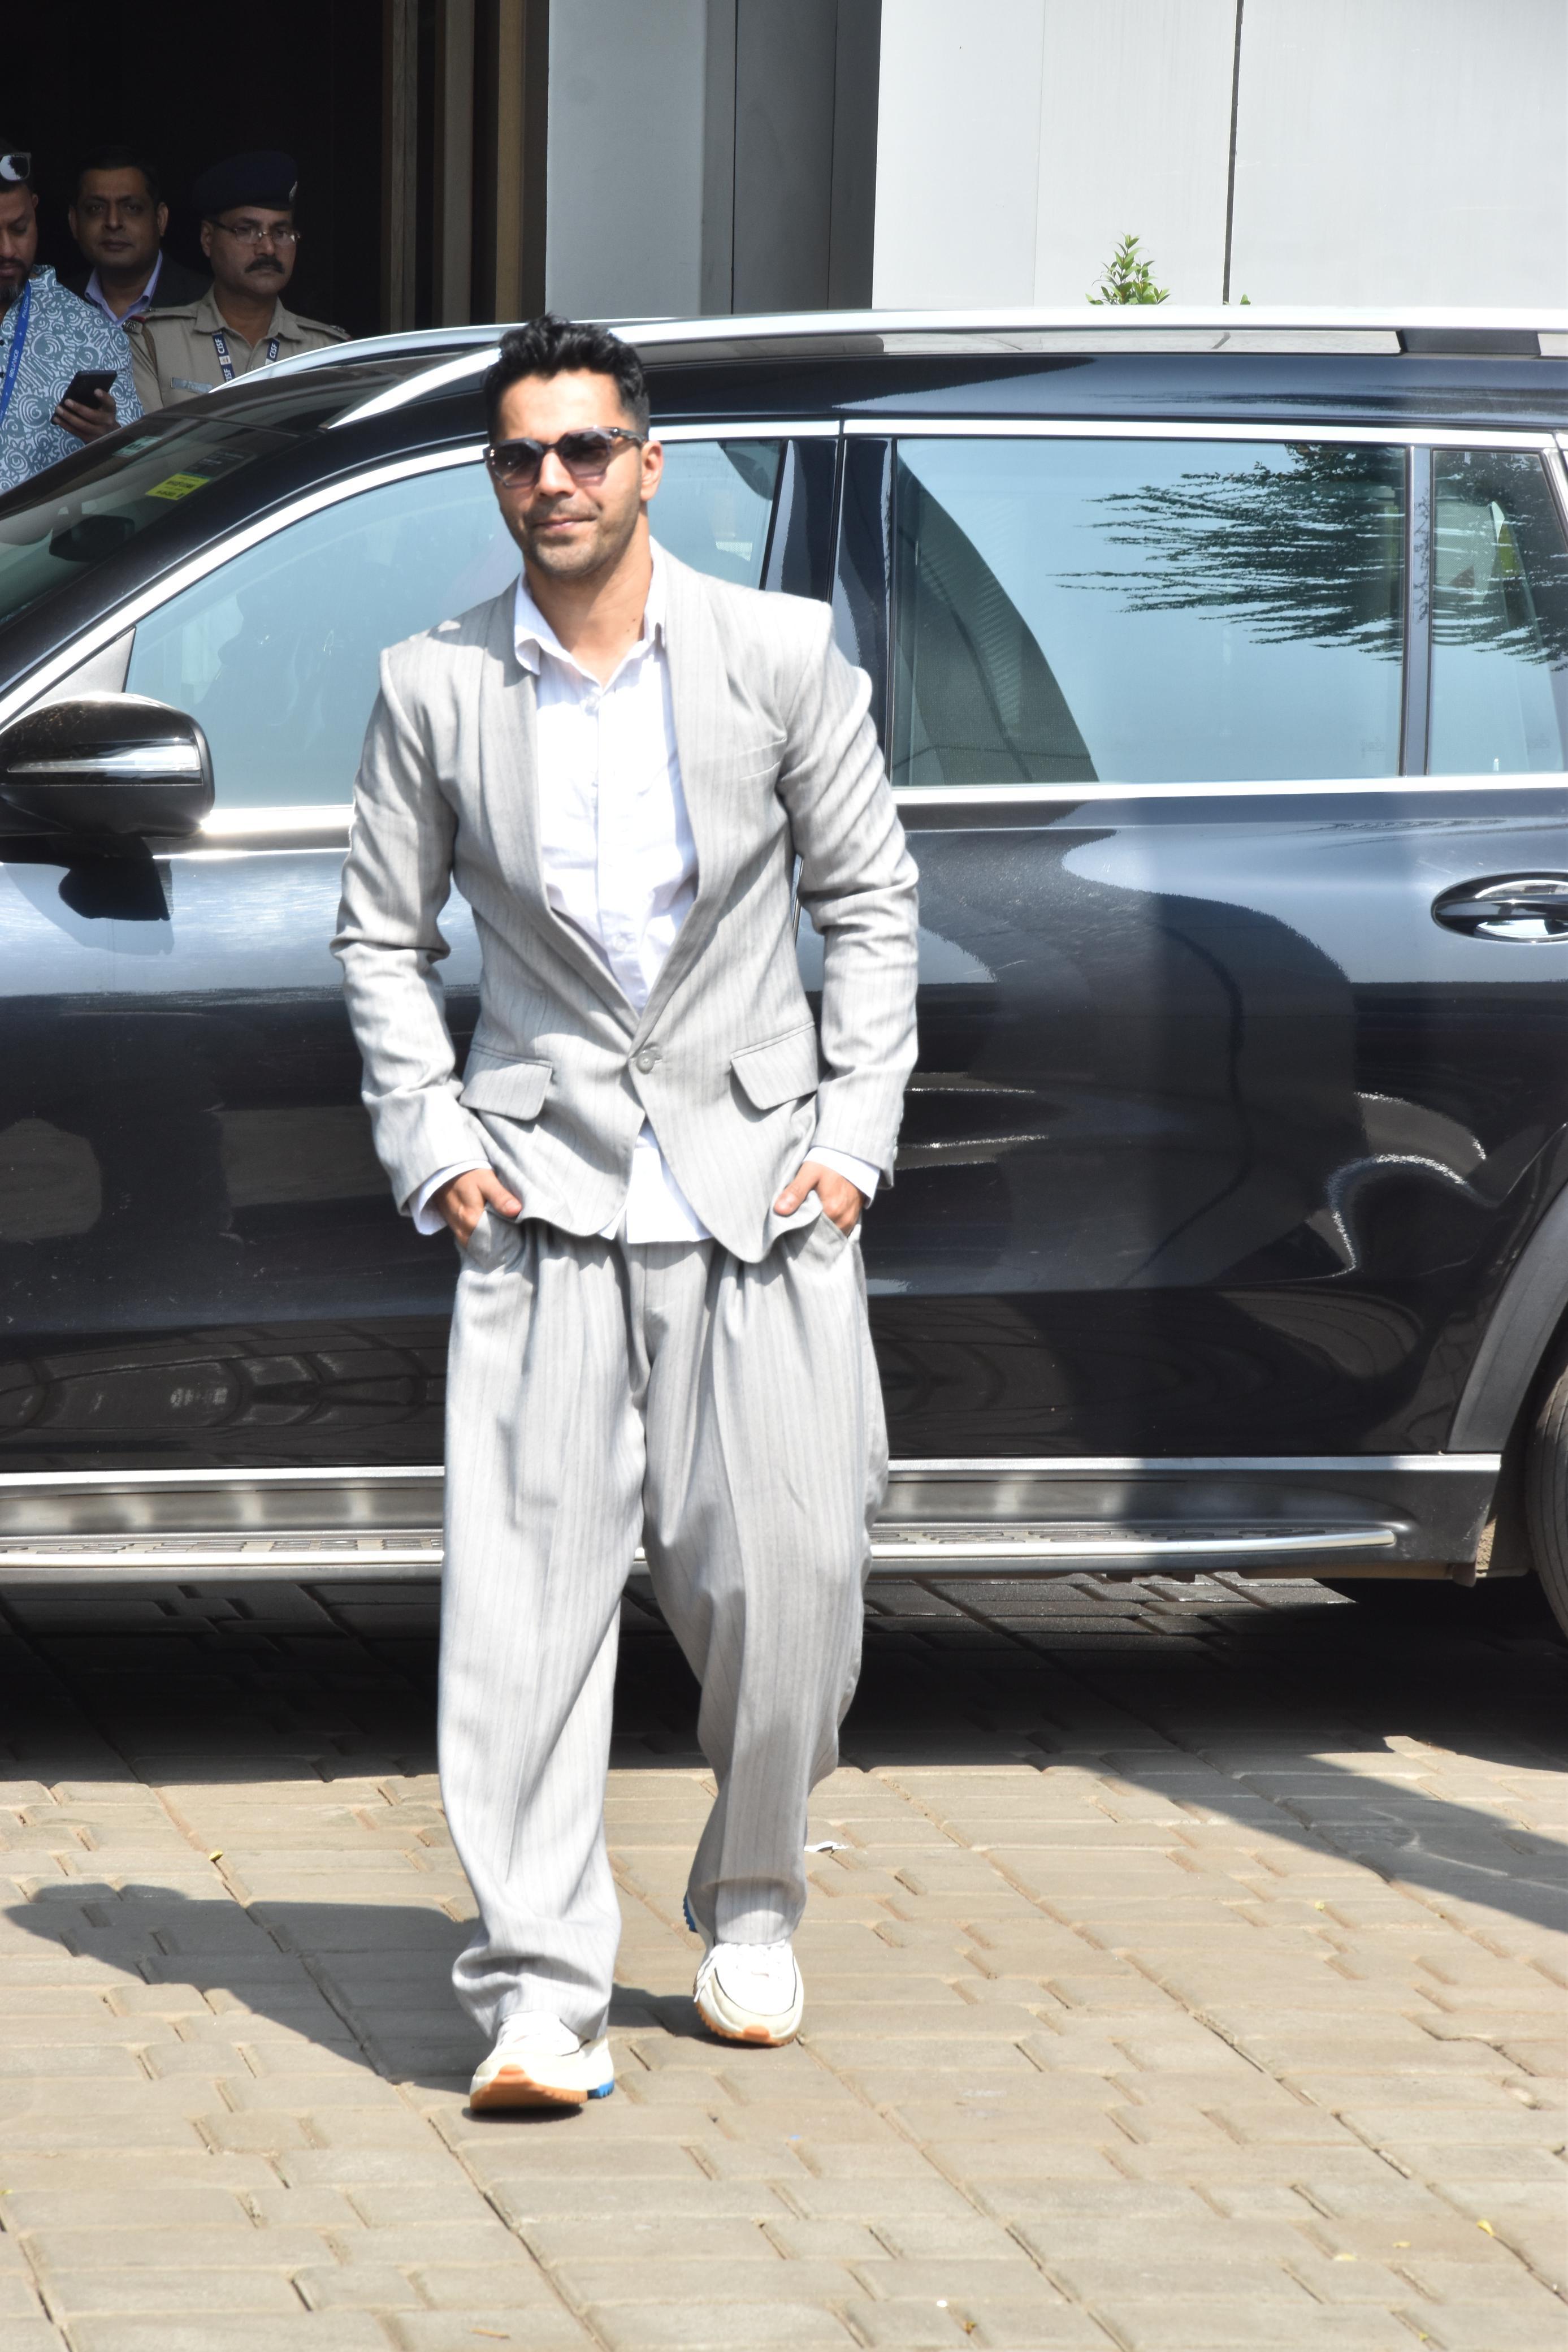 Varun Dhawan was photographed in a smart three-piece suit